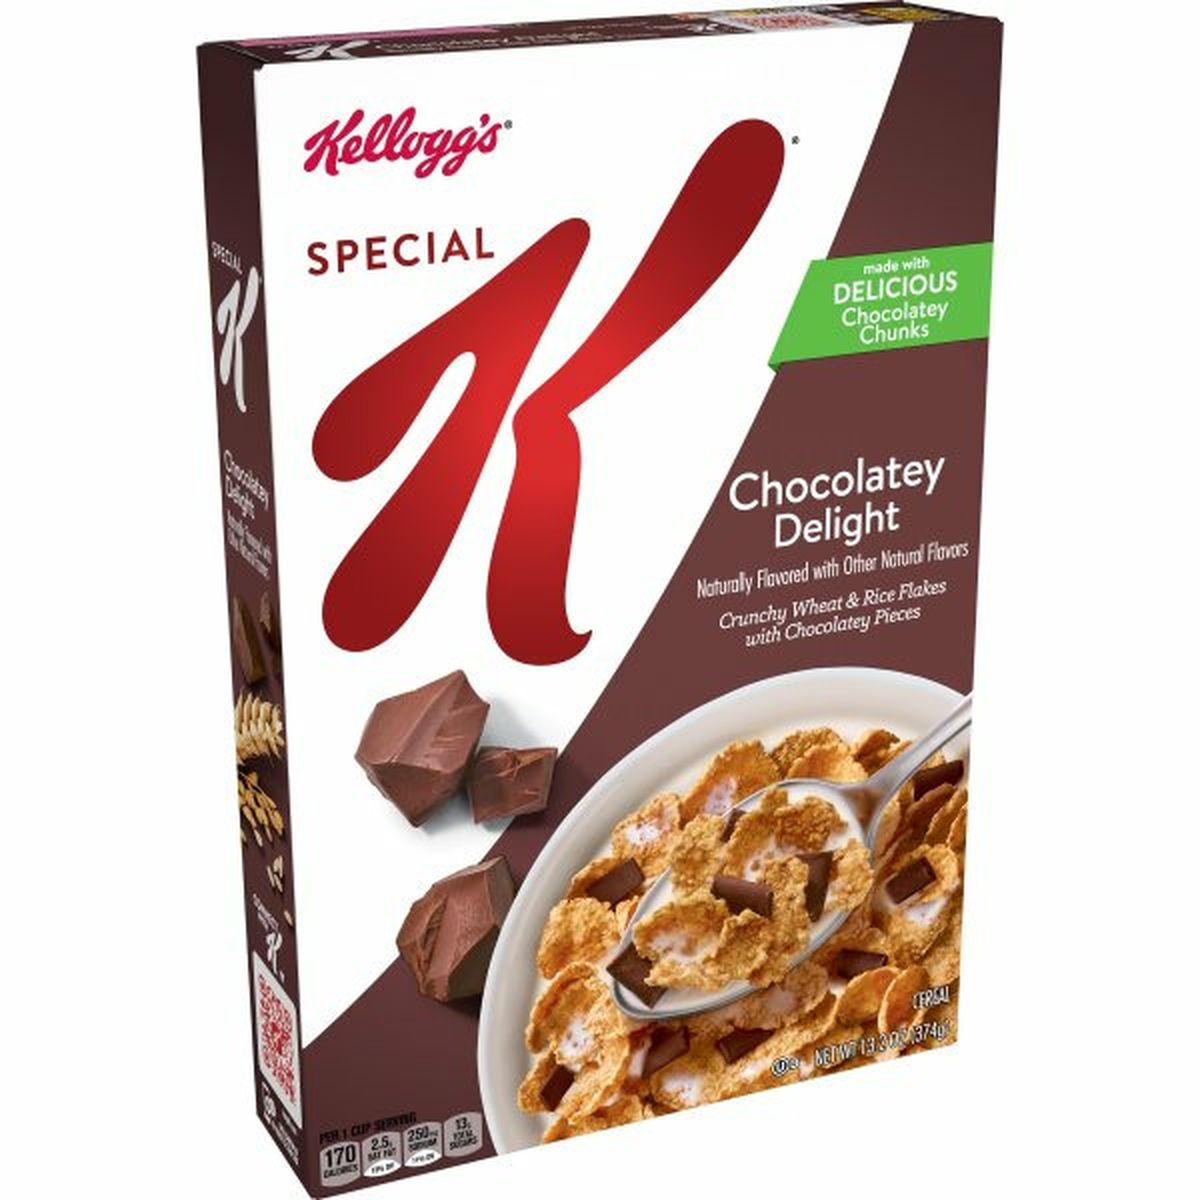 Calories in Kellogg's Special K Cereal Kellogg's Special K Breakfast Cereal, Chocolatey Delight, Good Source of Fiber, 13.2oz